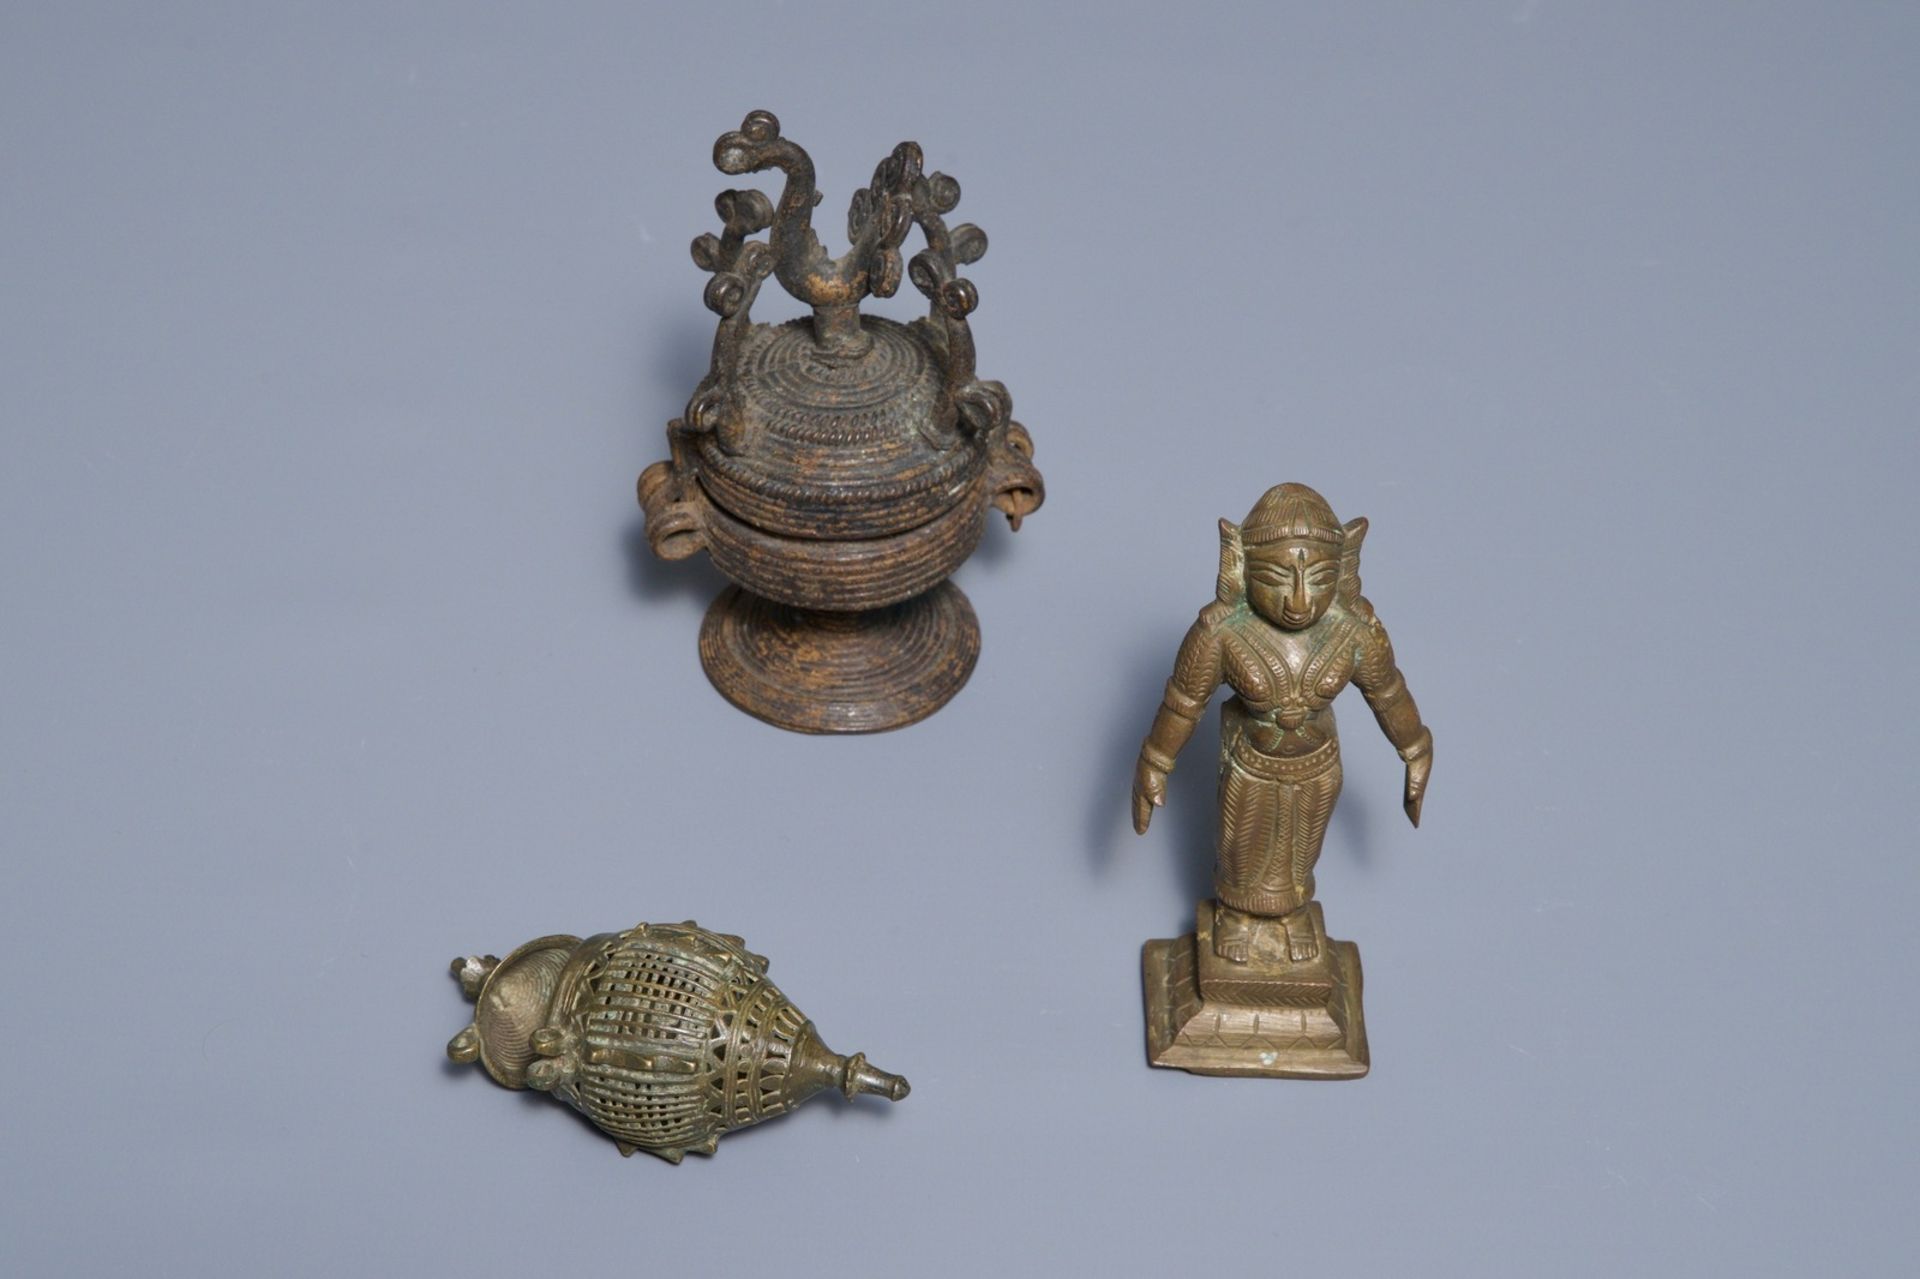 A group of silver and bronze statues and utensils, India, 18/19th C. - Image 4 of 4